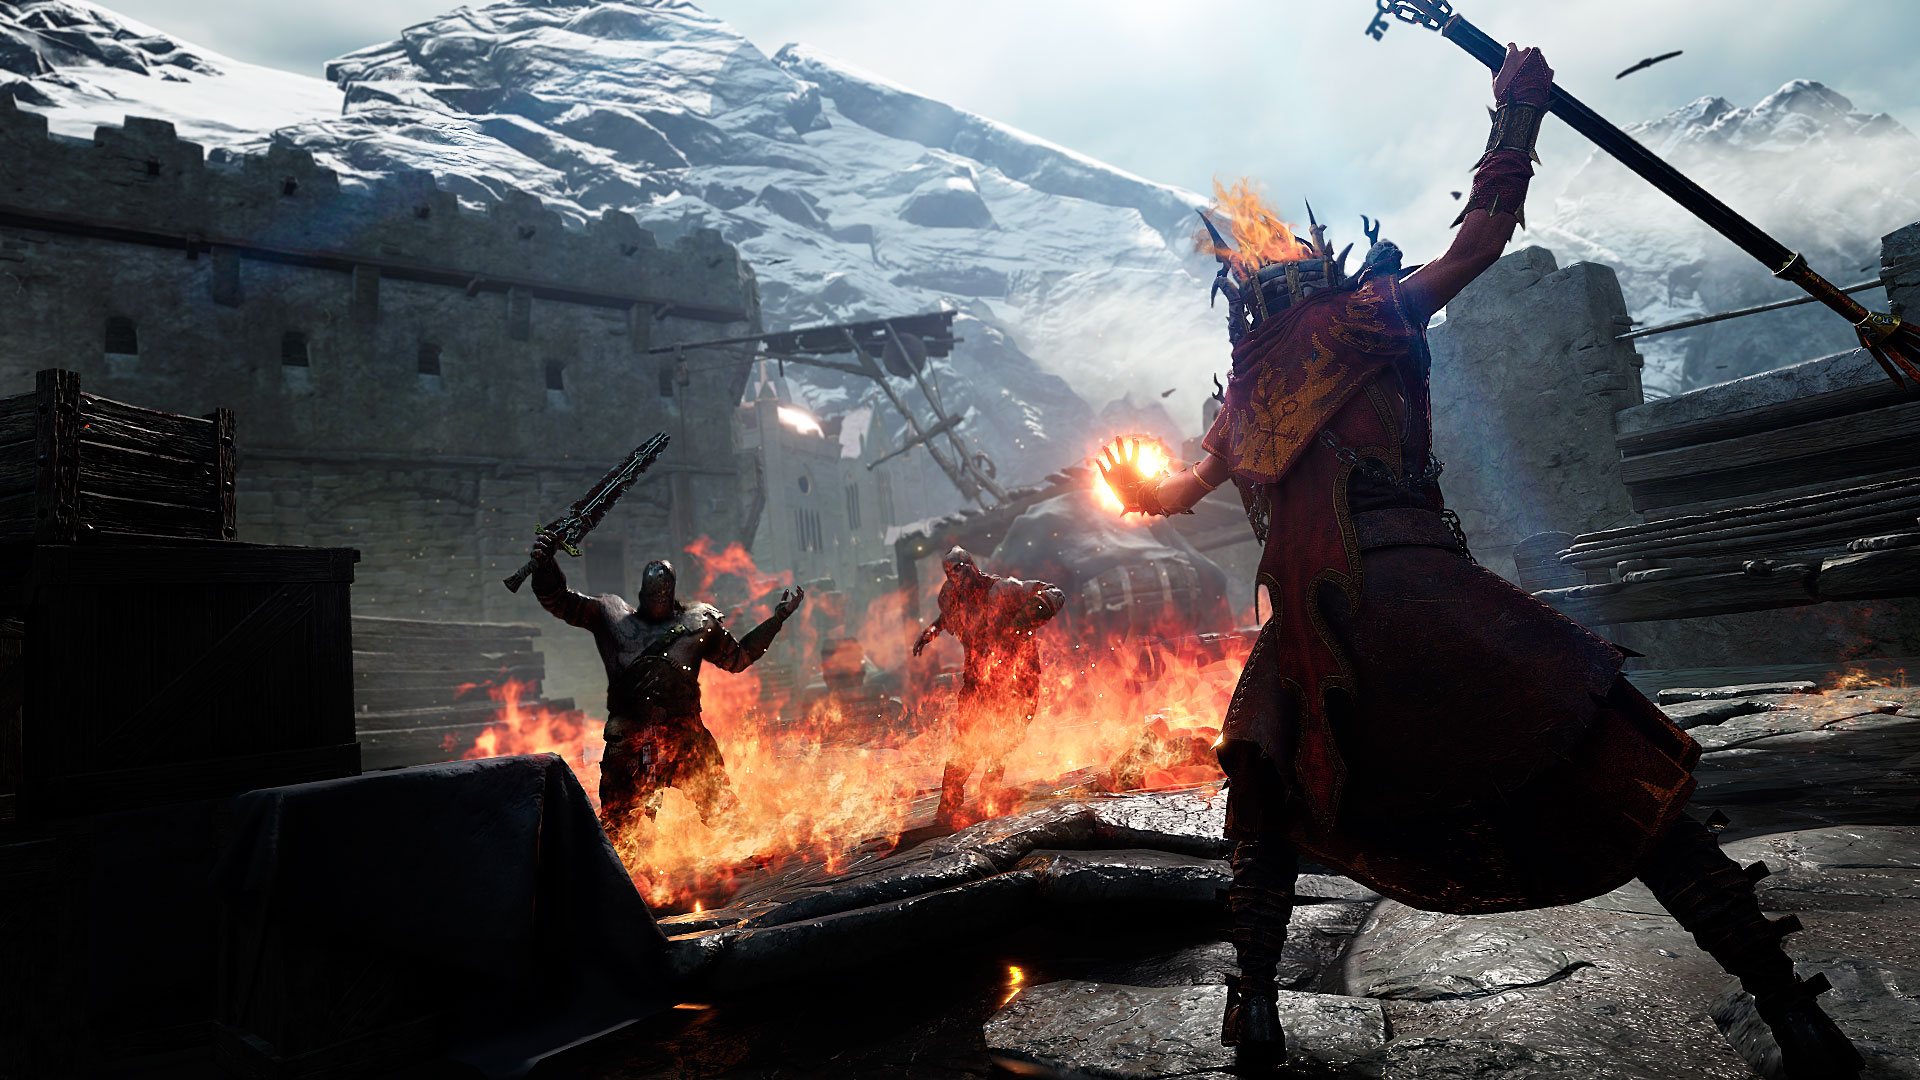 Warhammer: Vermintide 2 Tips and tricks for legend or champion difficulty